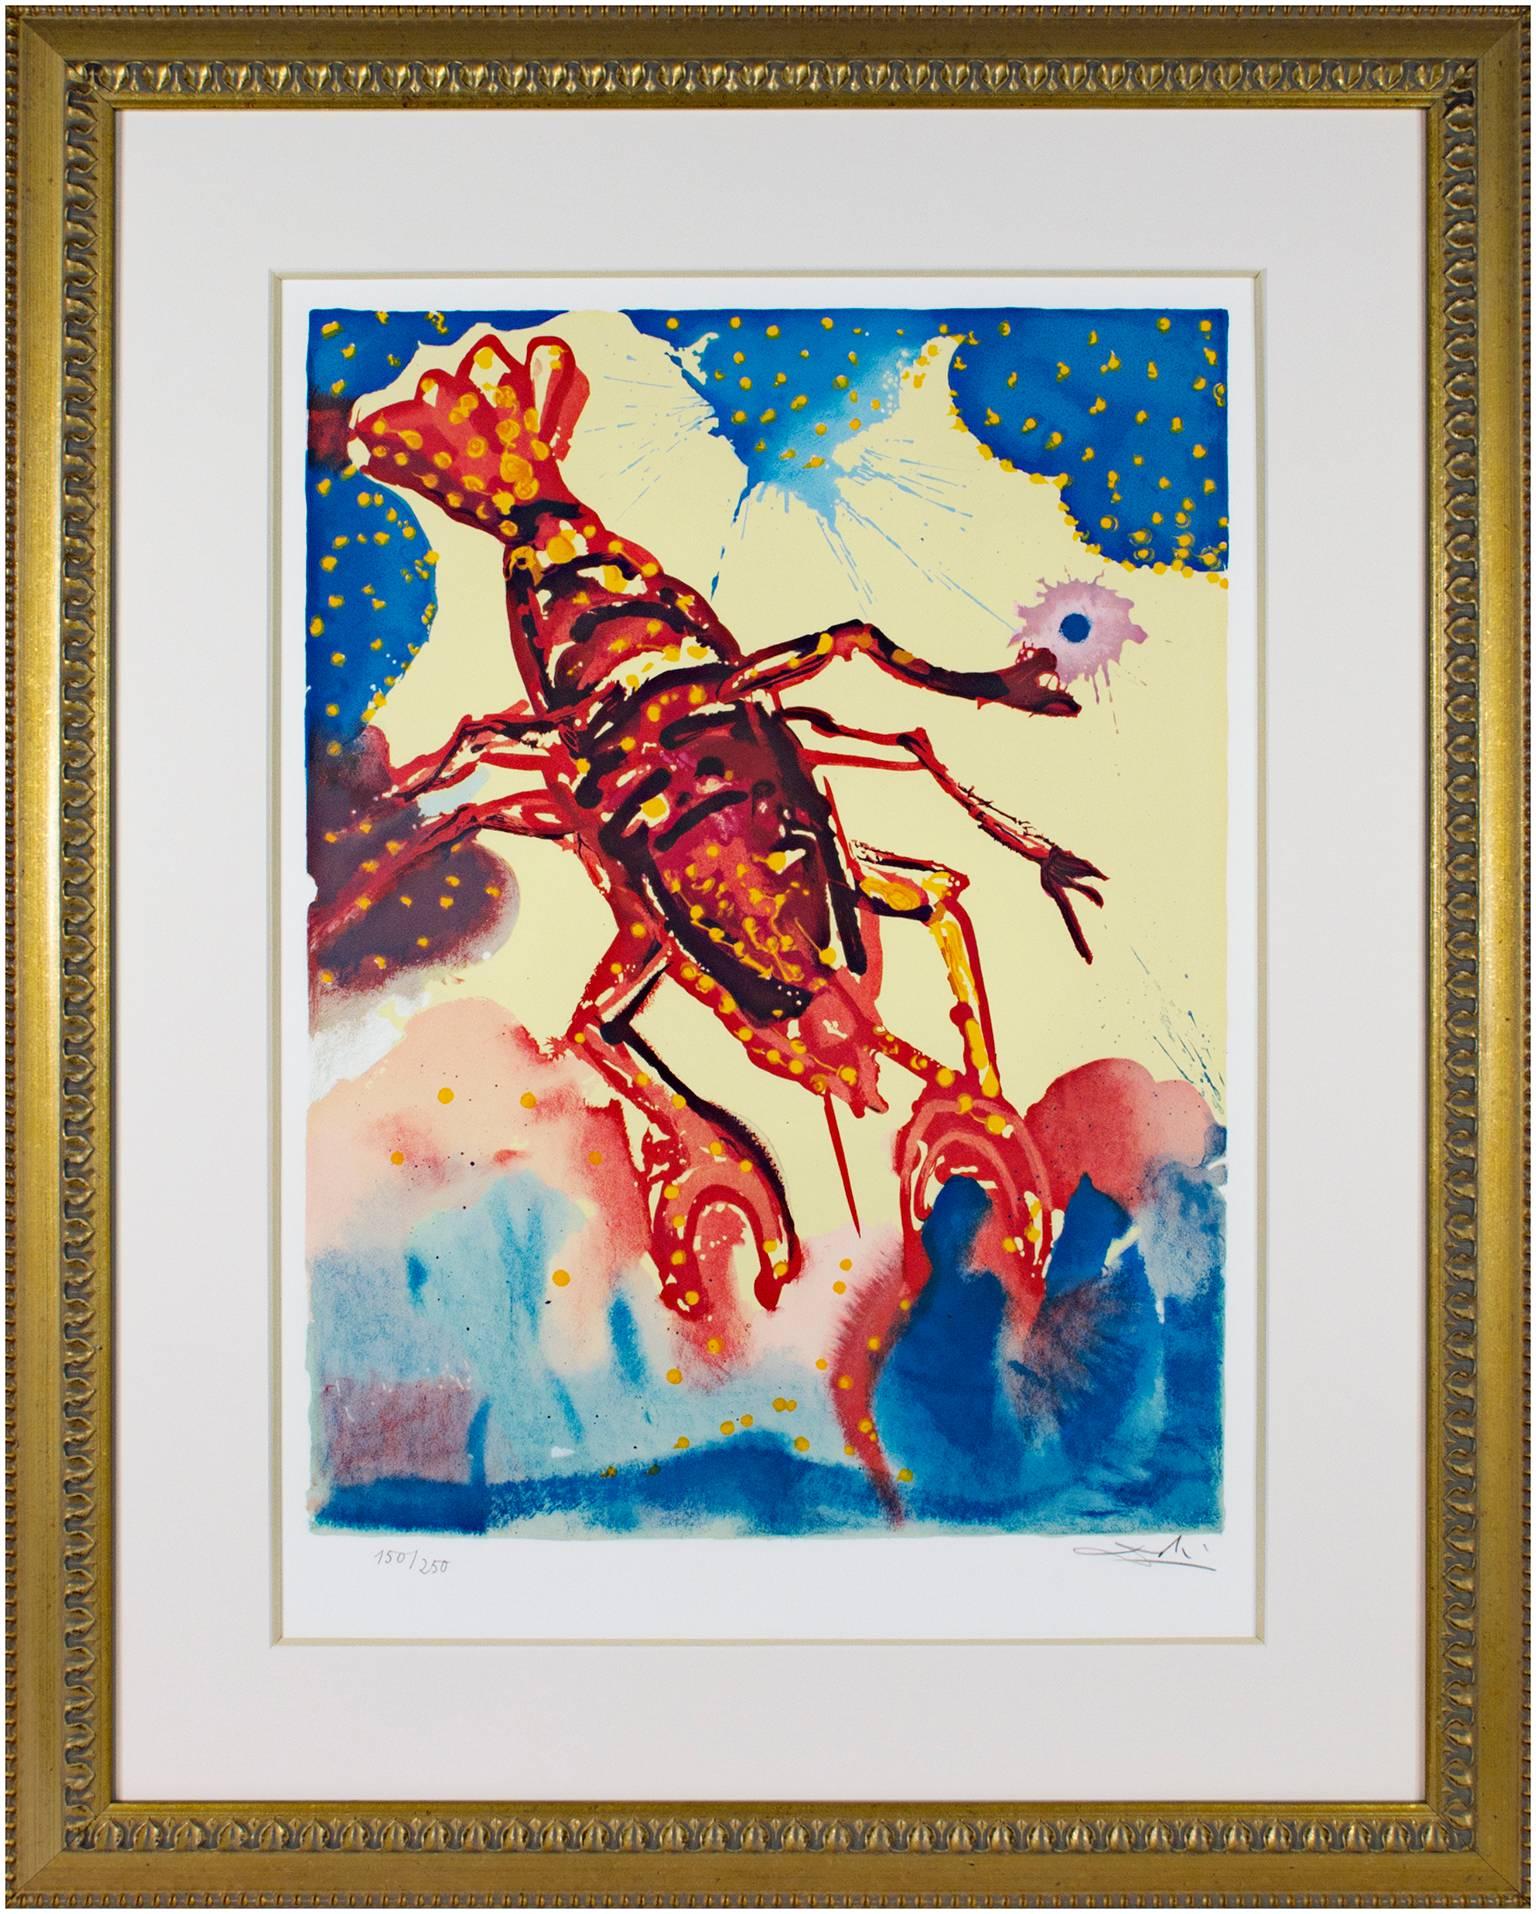 Signs of the Zodiac Series: Cancer - Print by Salvador Dalí